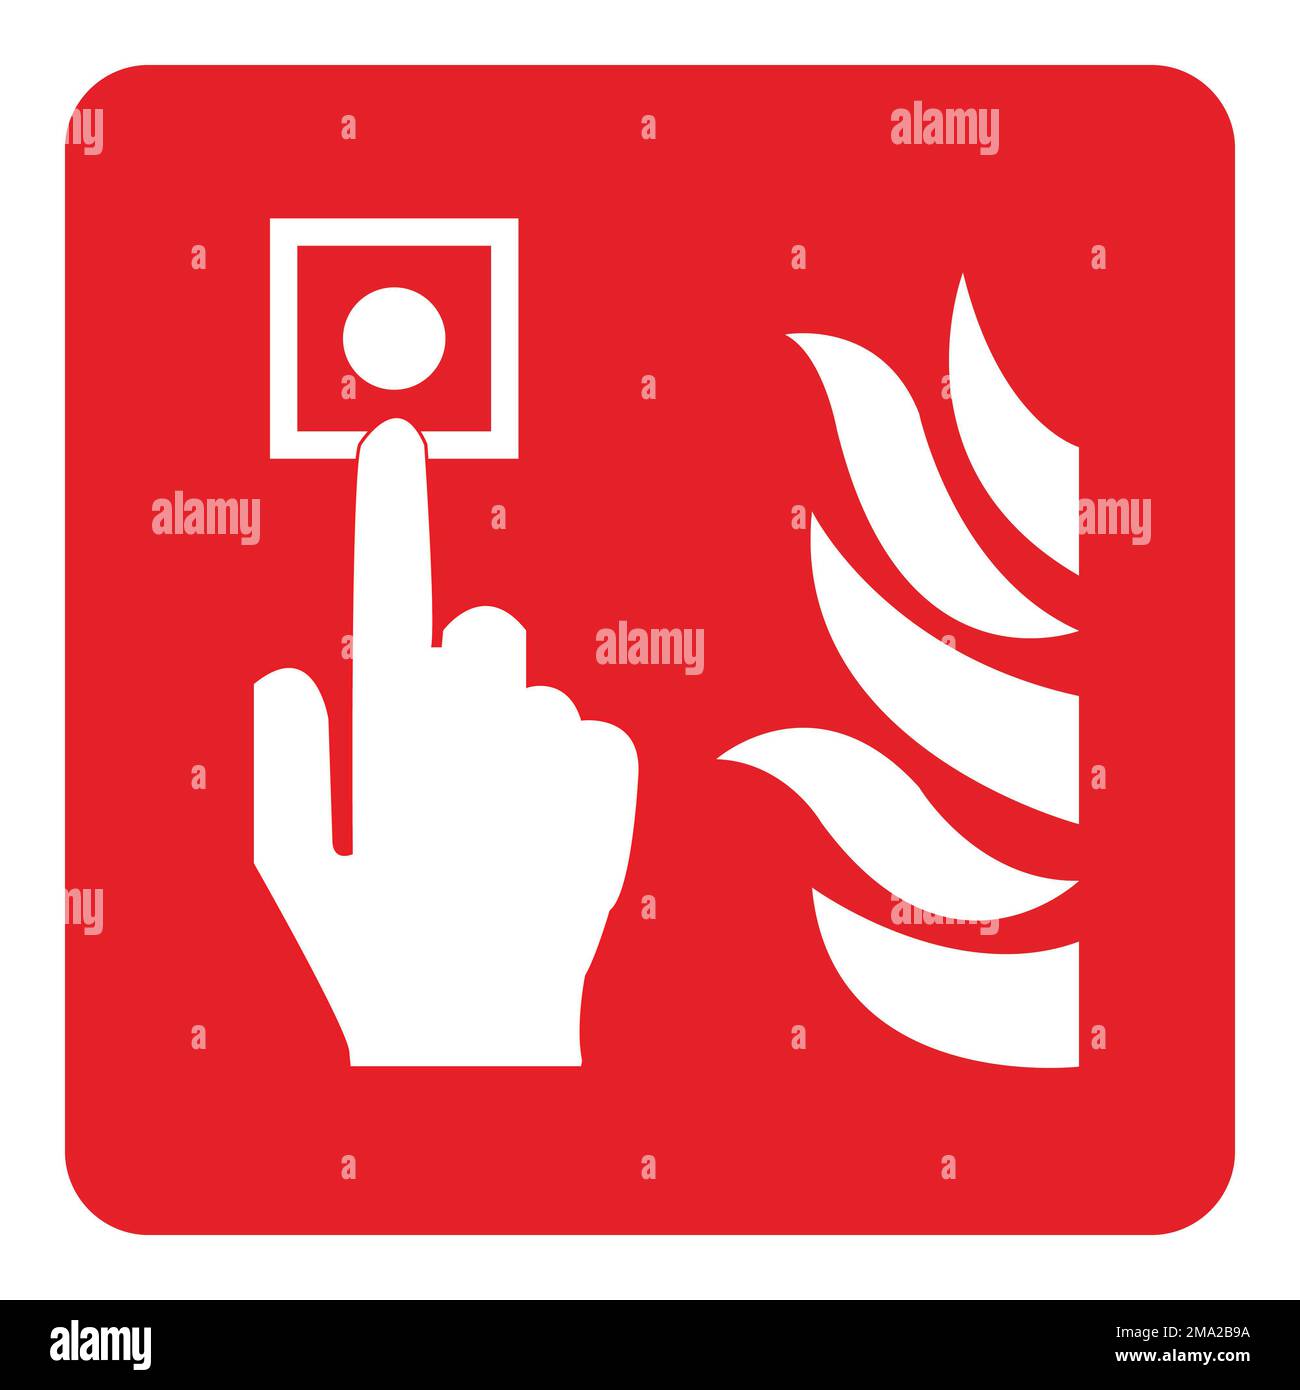 Fire alarm call point sign isolated on red background drawing by illustration. Stock Photo